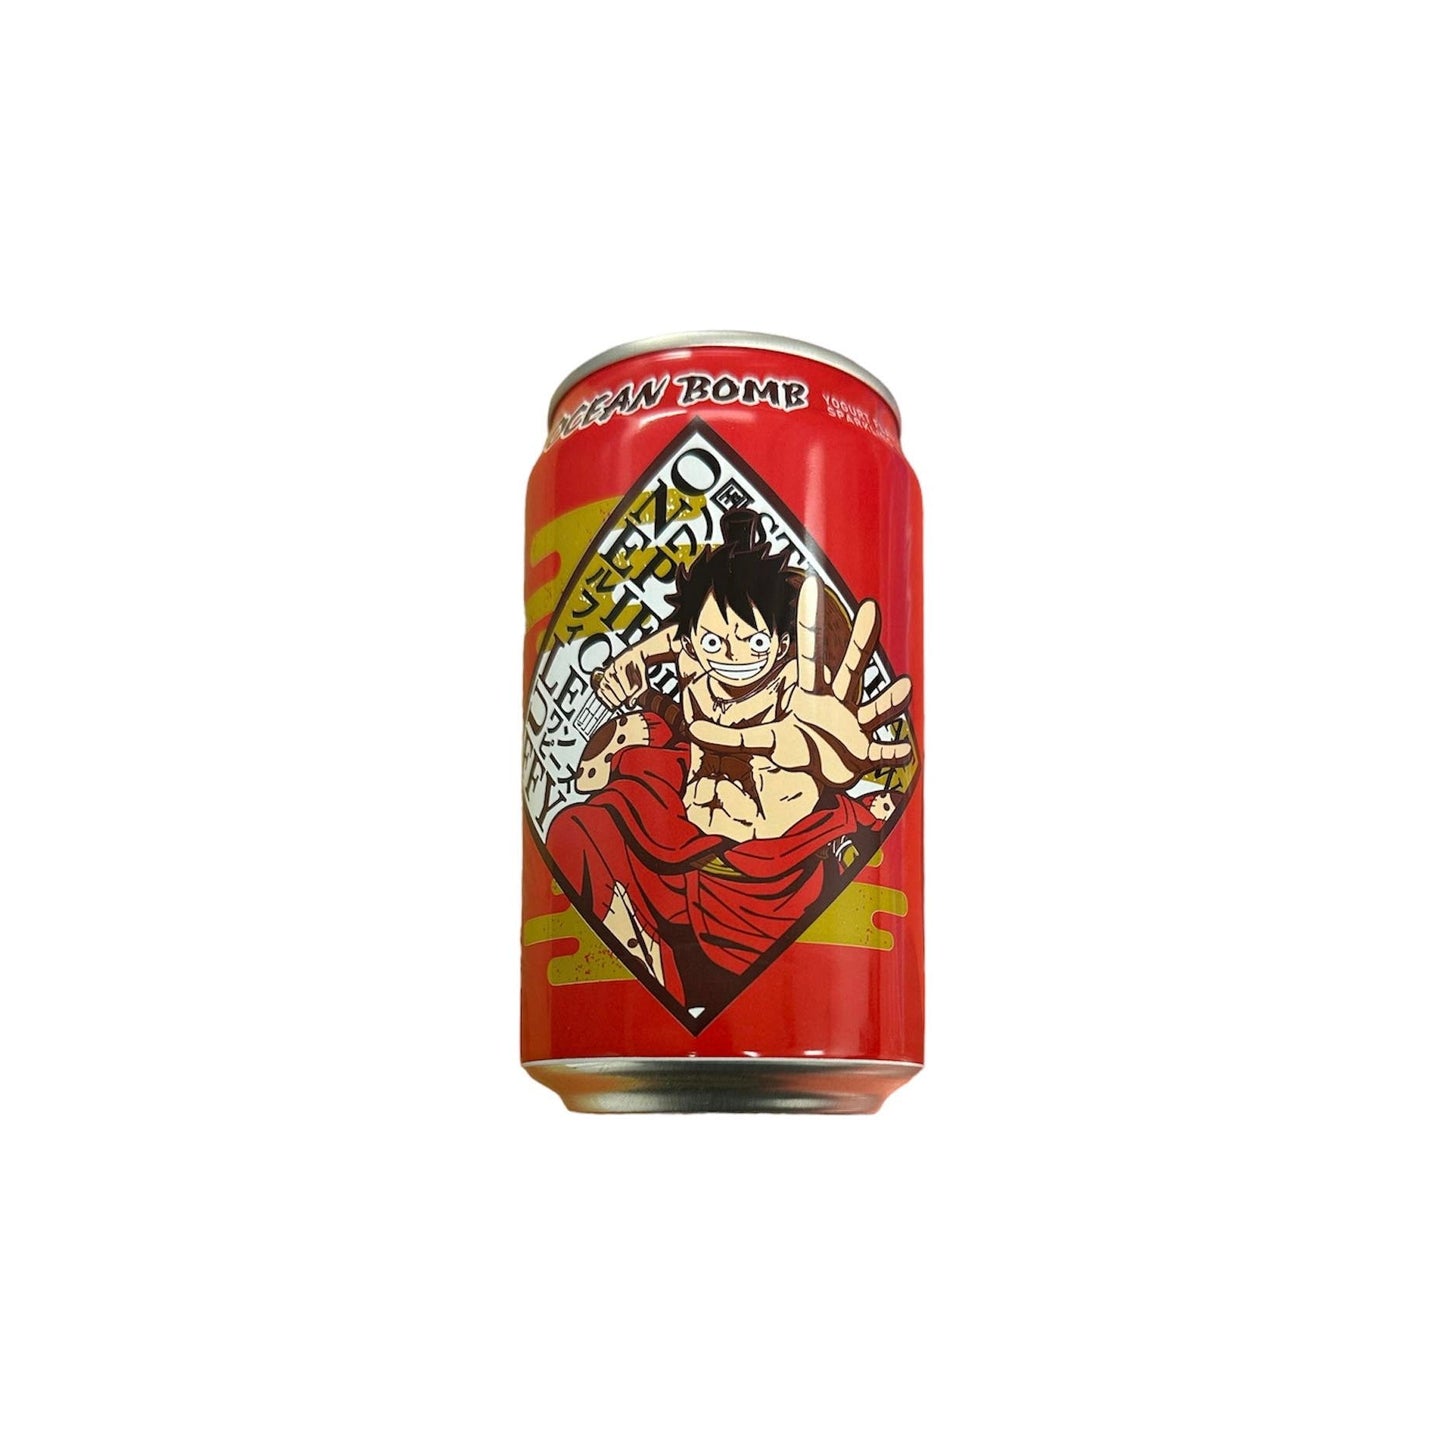 Ocean Bomb One Piece Luffy Yogurt 330ml 24ct (Shipping Extra, Click for Details)